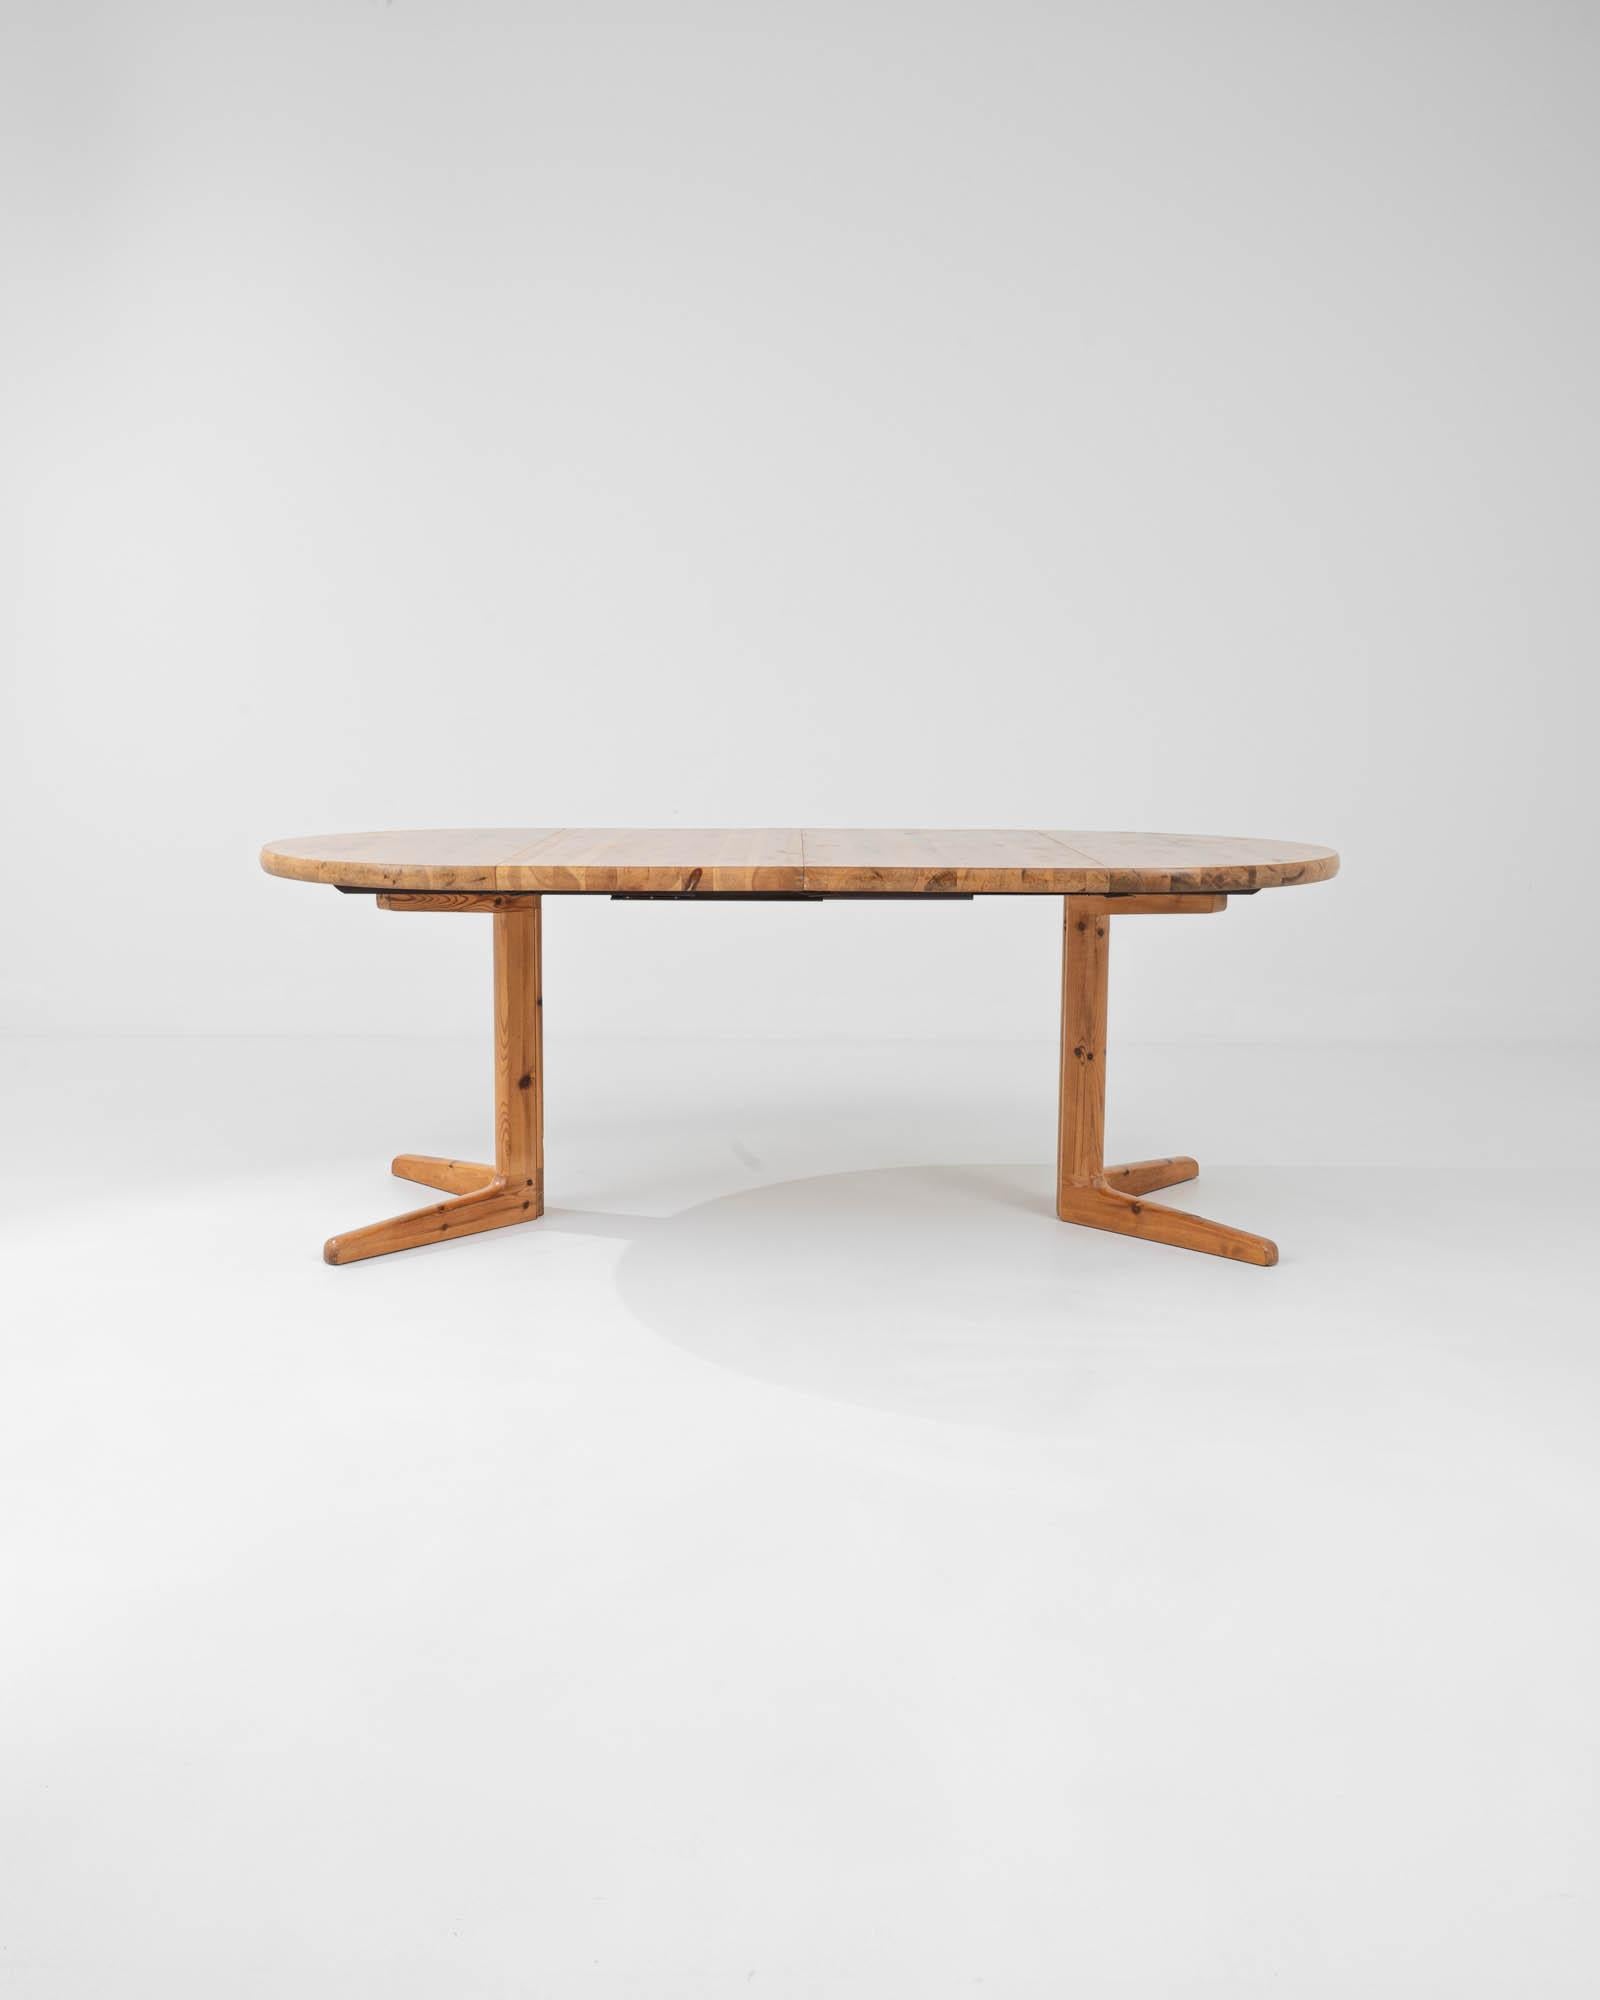 Discover the perfect fusion of functionality and art with the 20th Century Danish Wooden Dining Table by Rainer Daumiller. Meticulously designed to elevate any dining room with its organic simplicity and sturdy construction, this piece showcases the